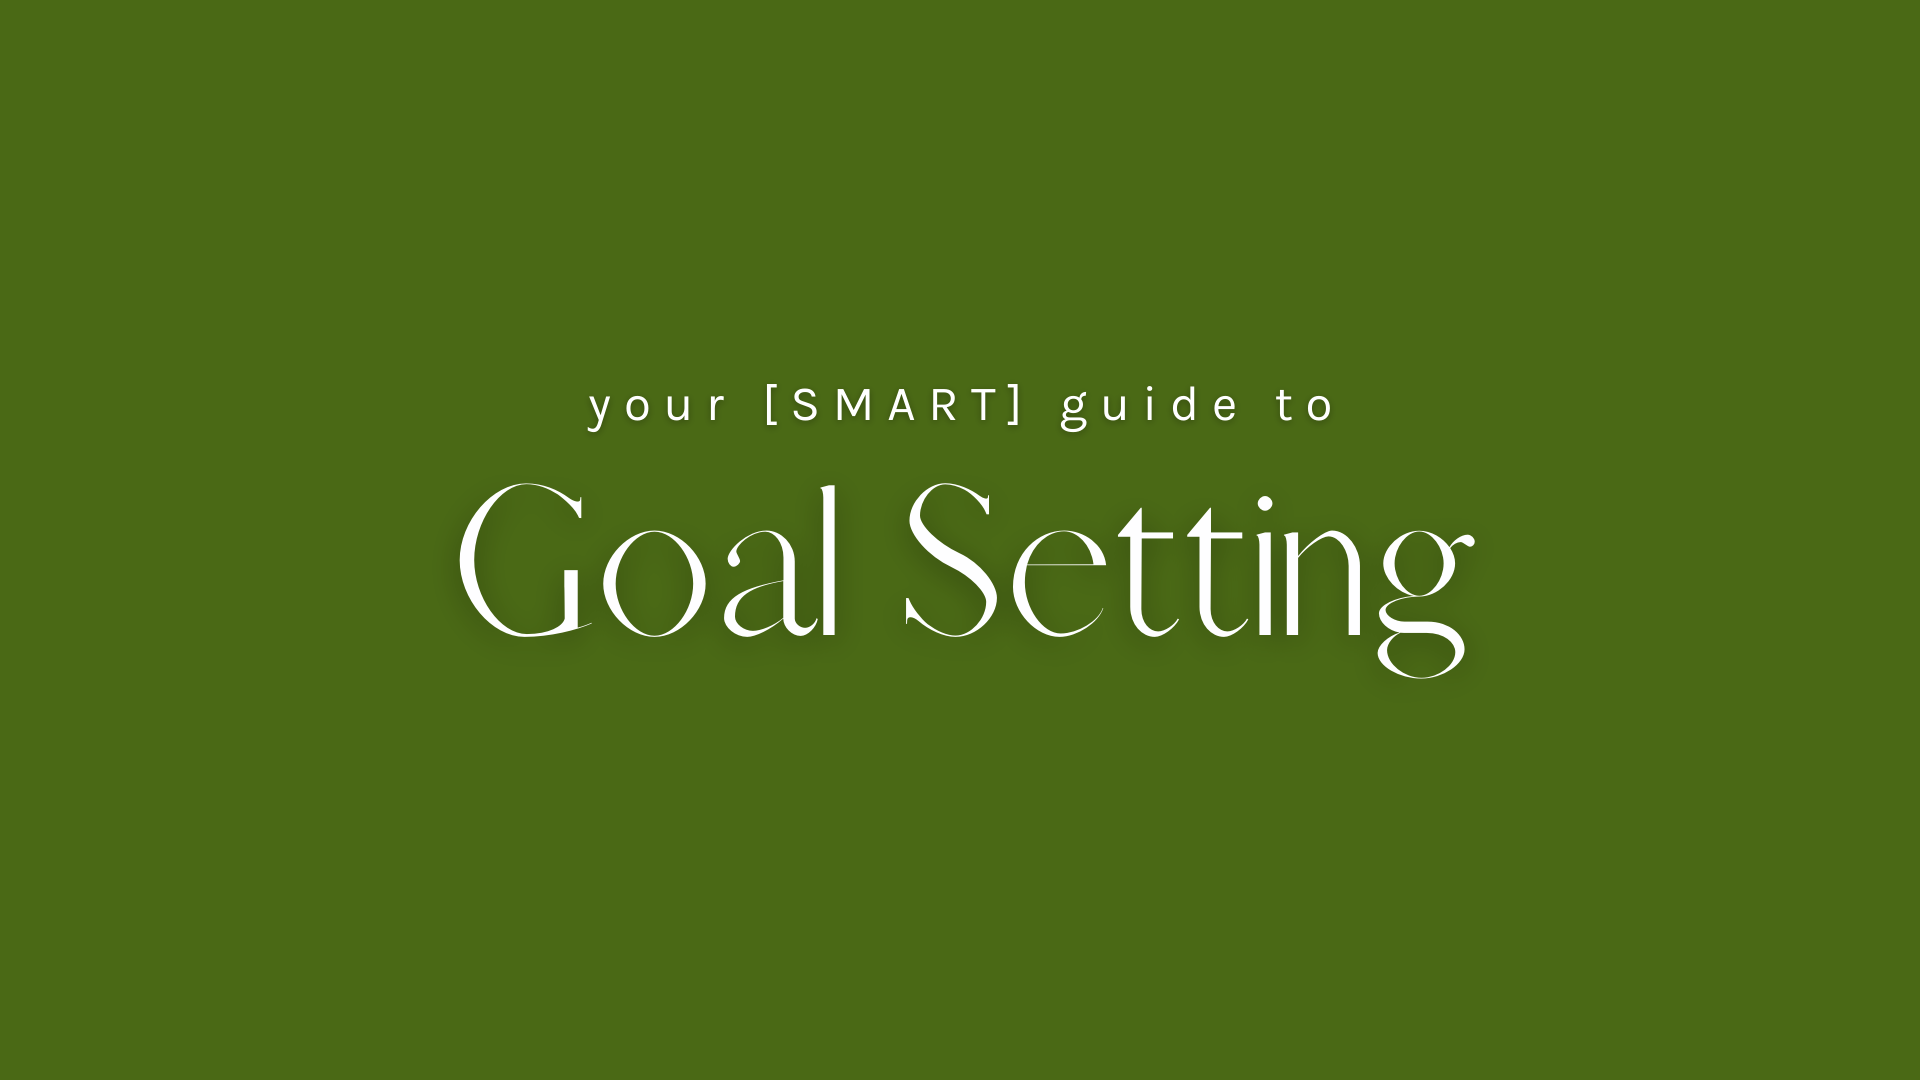 Your SMART Guide To Goal Setting